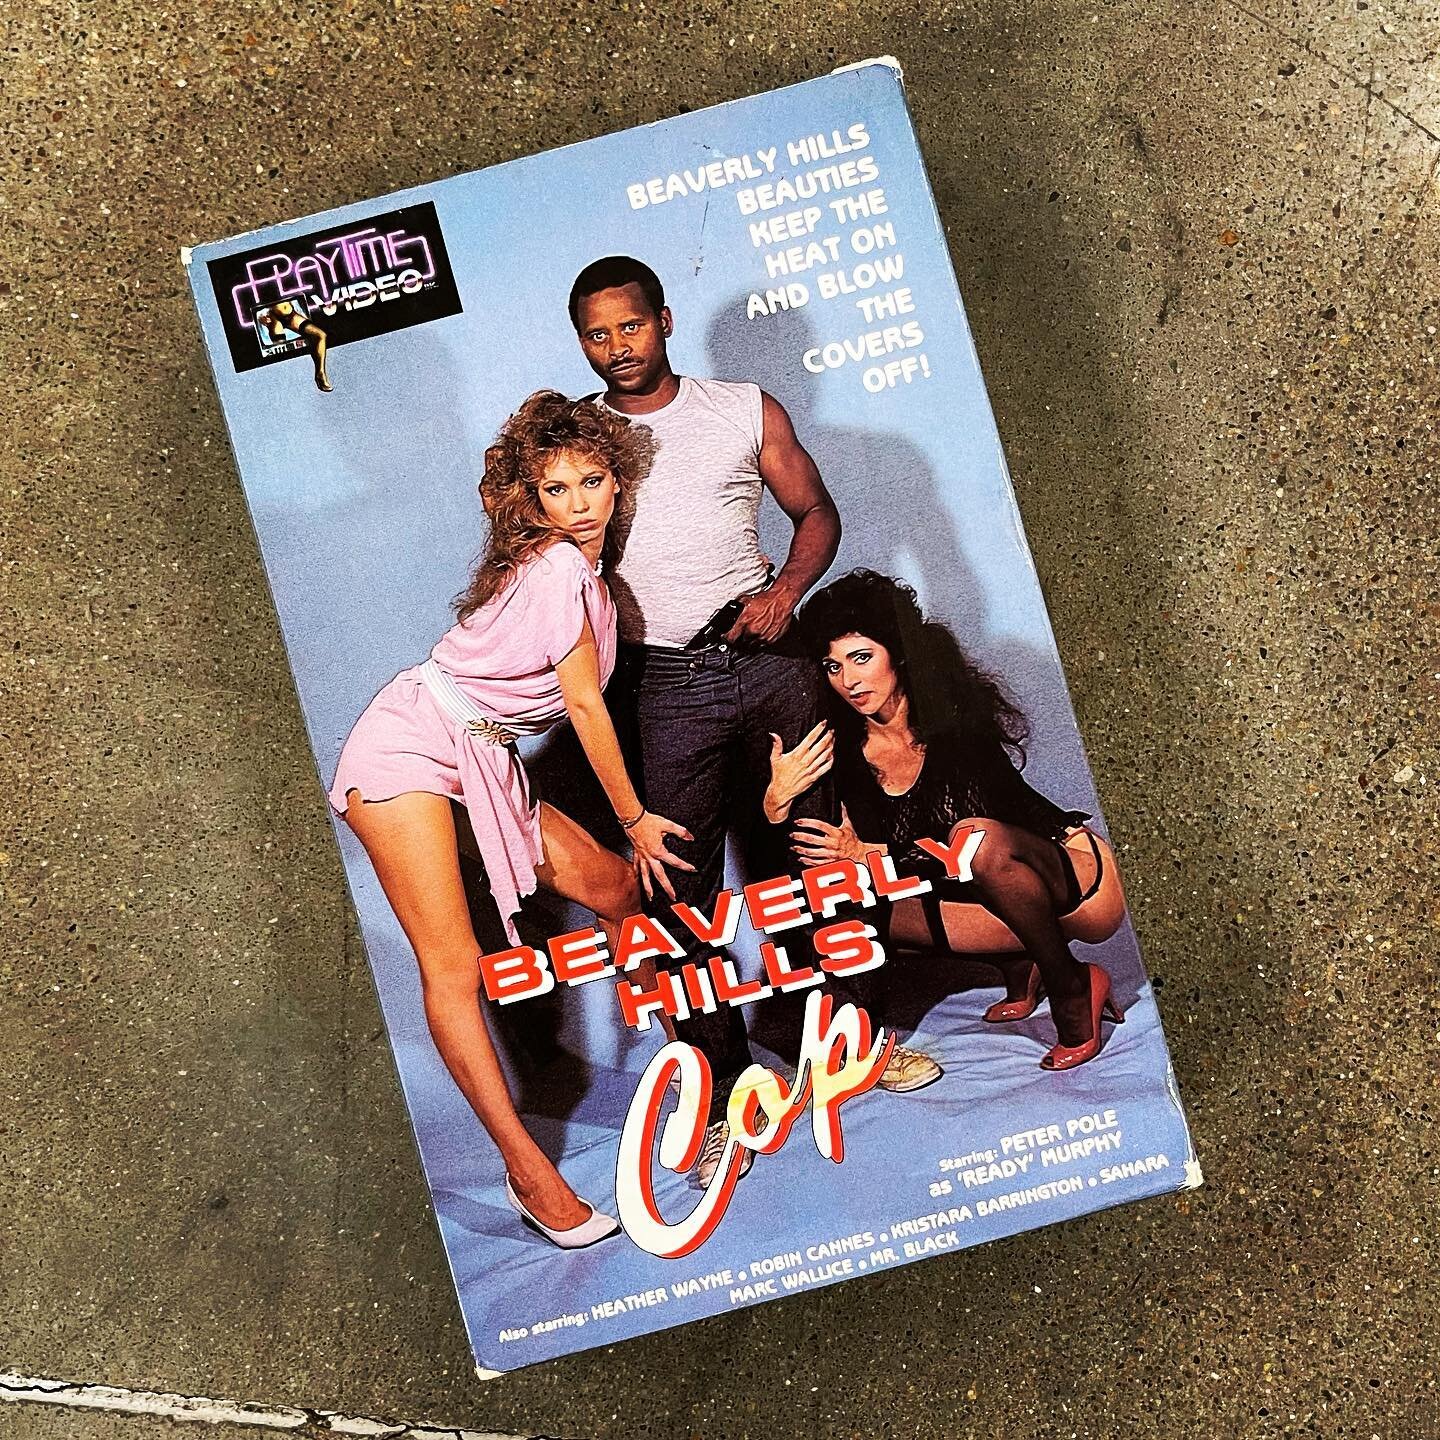 We rarely go blue, but this is a classic from the Video Sanctum vault.

#spoofporn #beverlyhillscop #axelfoley #bigboxvhs #videotrash #sexploitation #cultfilm #videostore #feedyourvcr #vhscollector